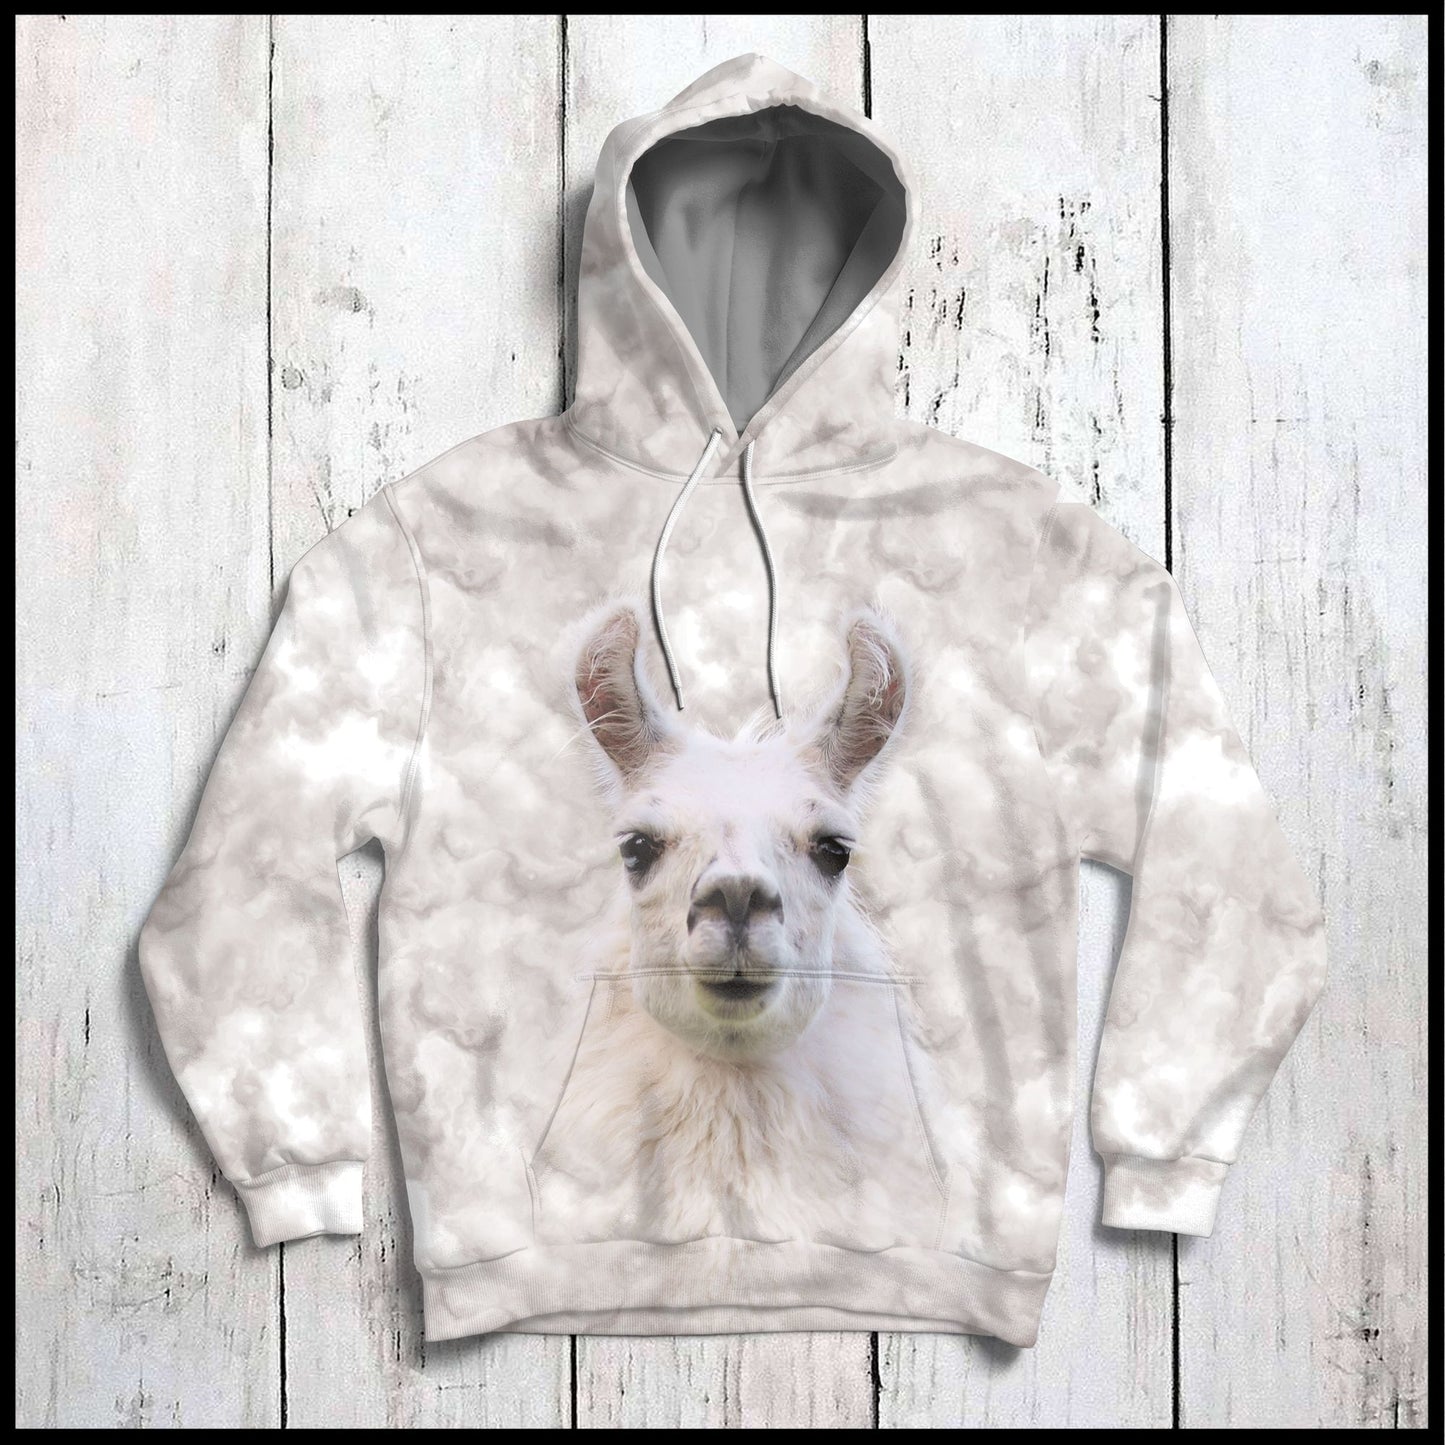 Awesome Llama G5814 unisex womens & mens, couples matching, friends, funny family sublimation 3D hoodie christmas holiday gifts (plus size available)